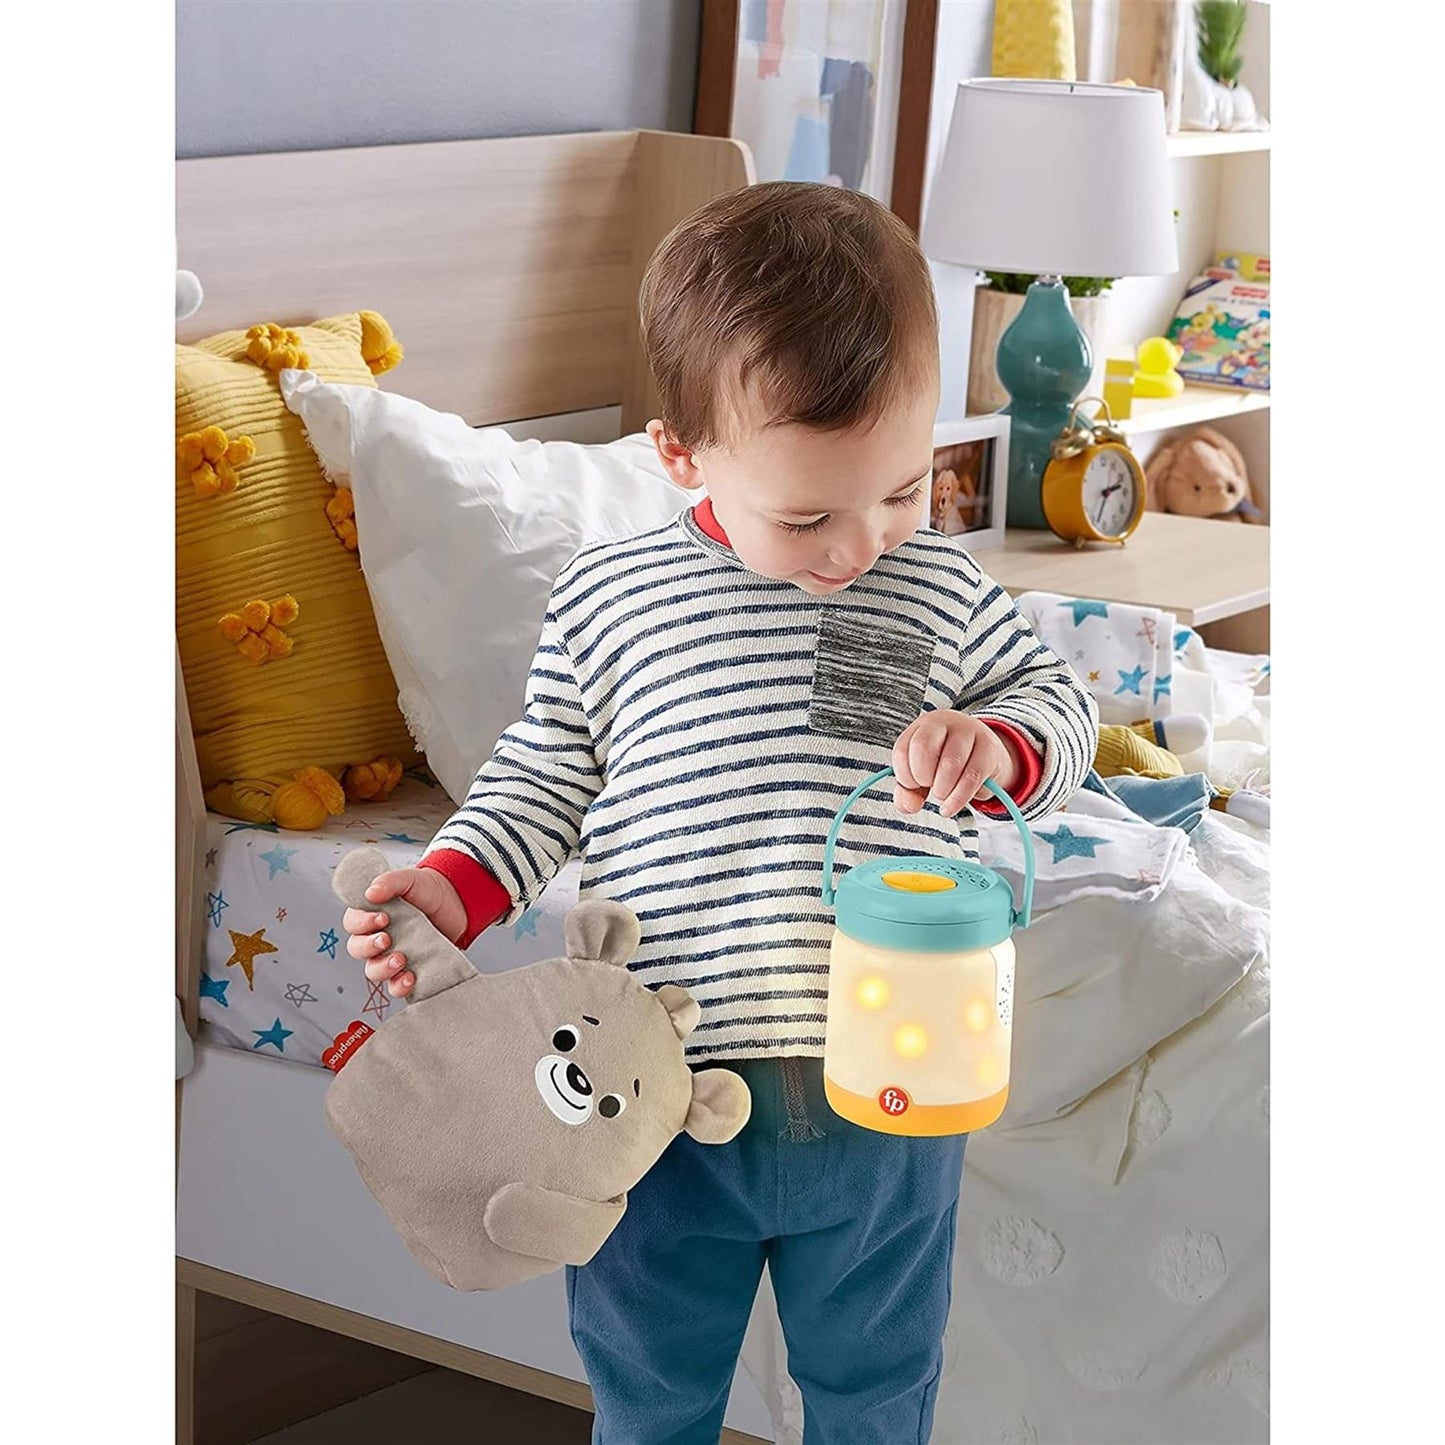 Twinkle Teddy Firefly Soother With Calming Music by Fisher Price - UKBuyZone